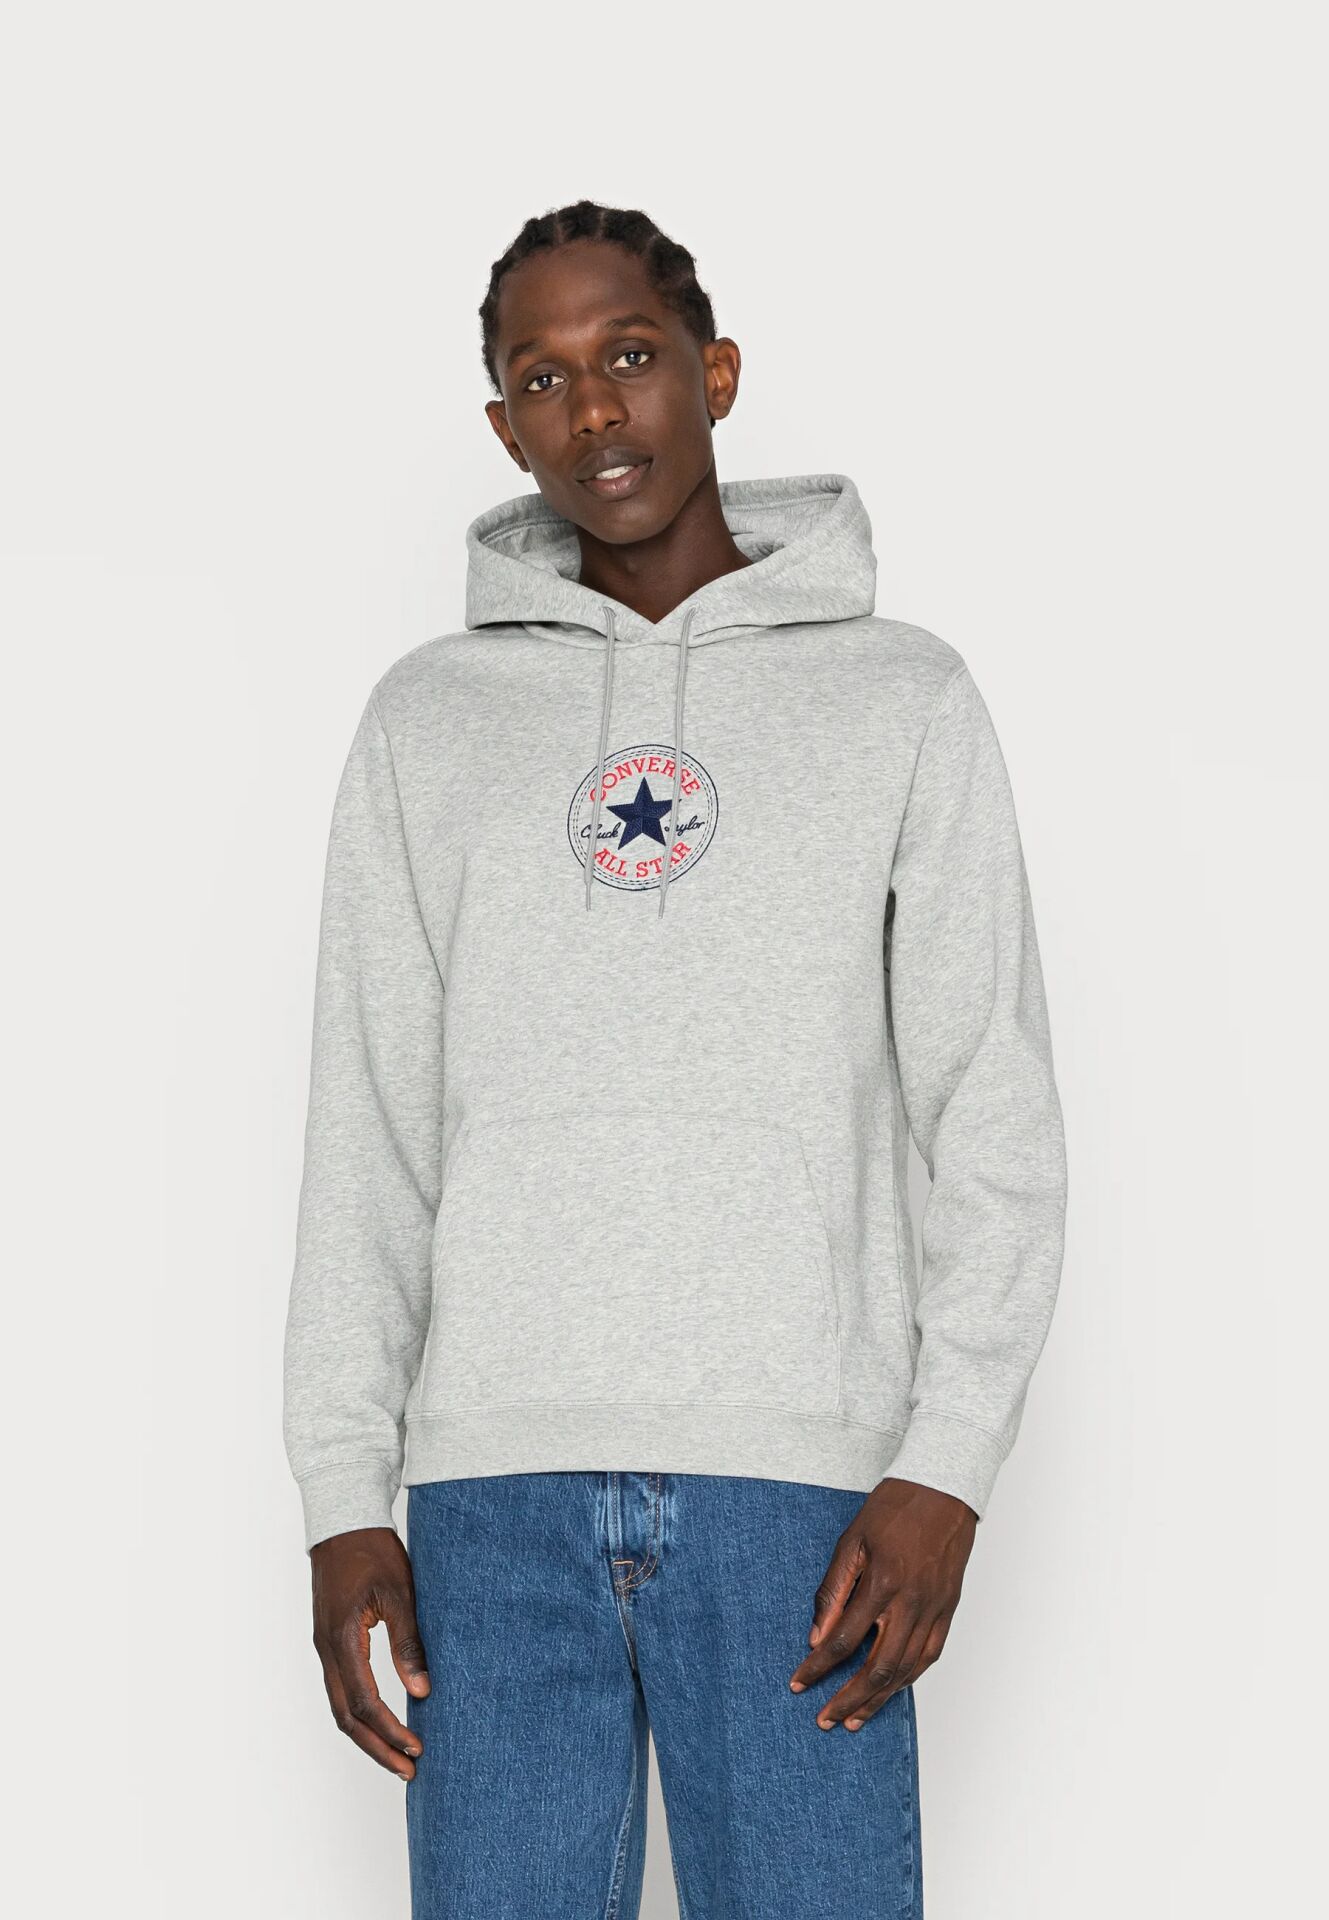 CONVERSE GTO ALLSTAR PATCH HOODIE GRY S